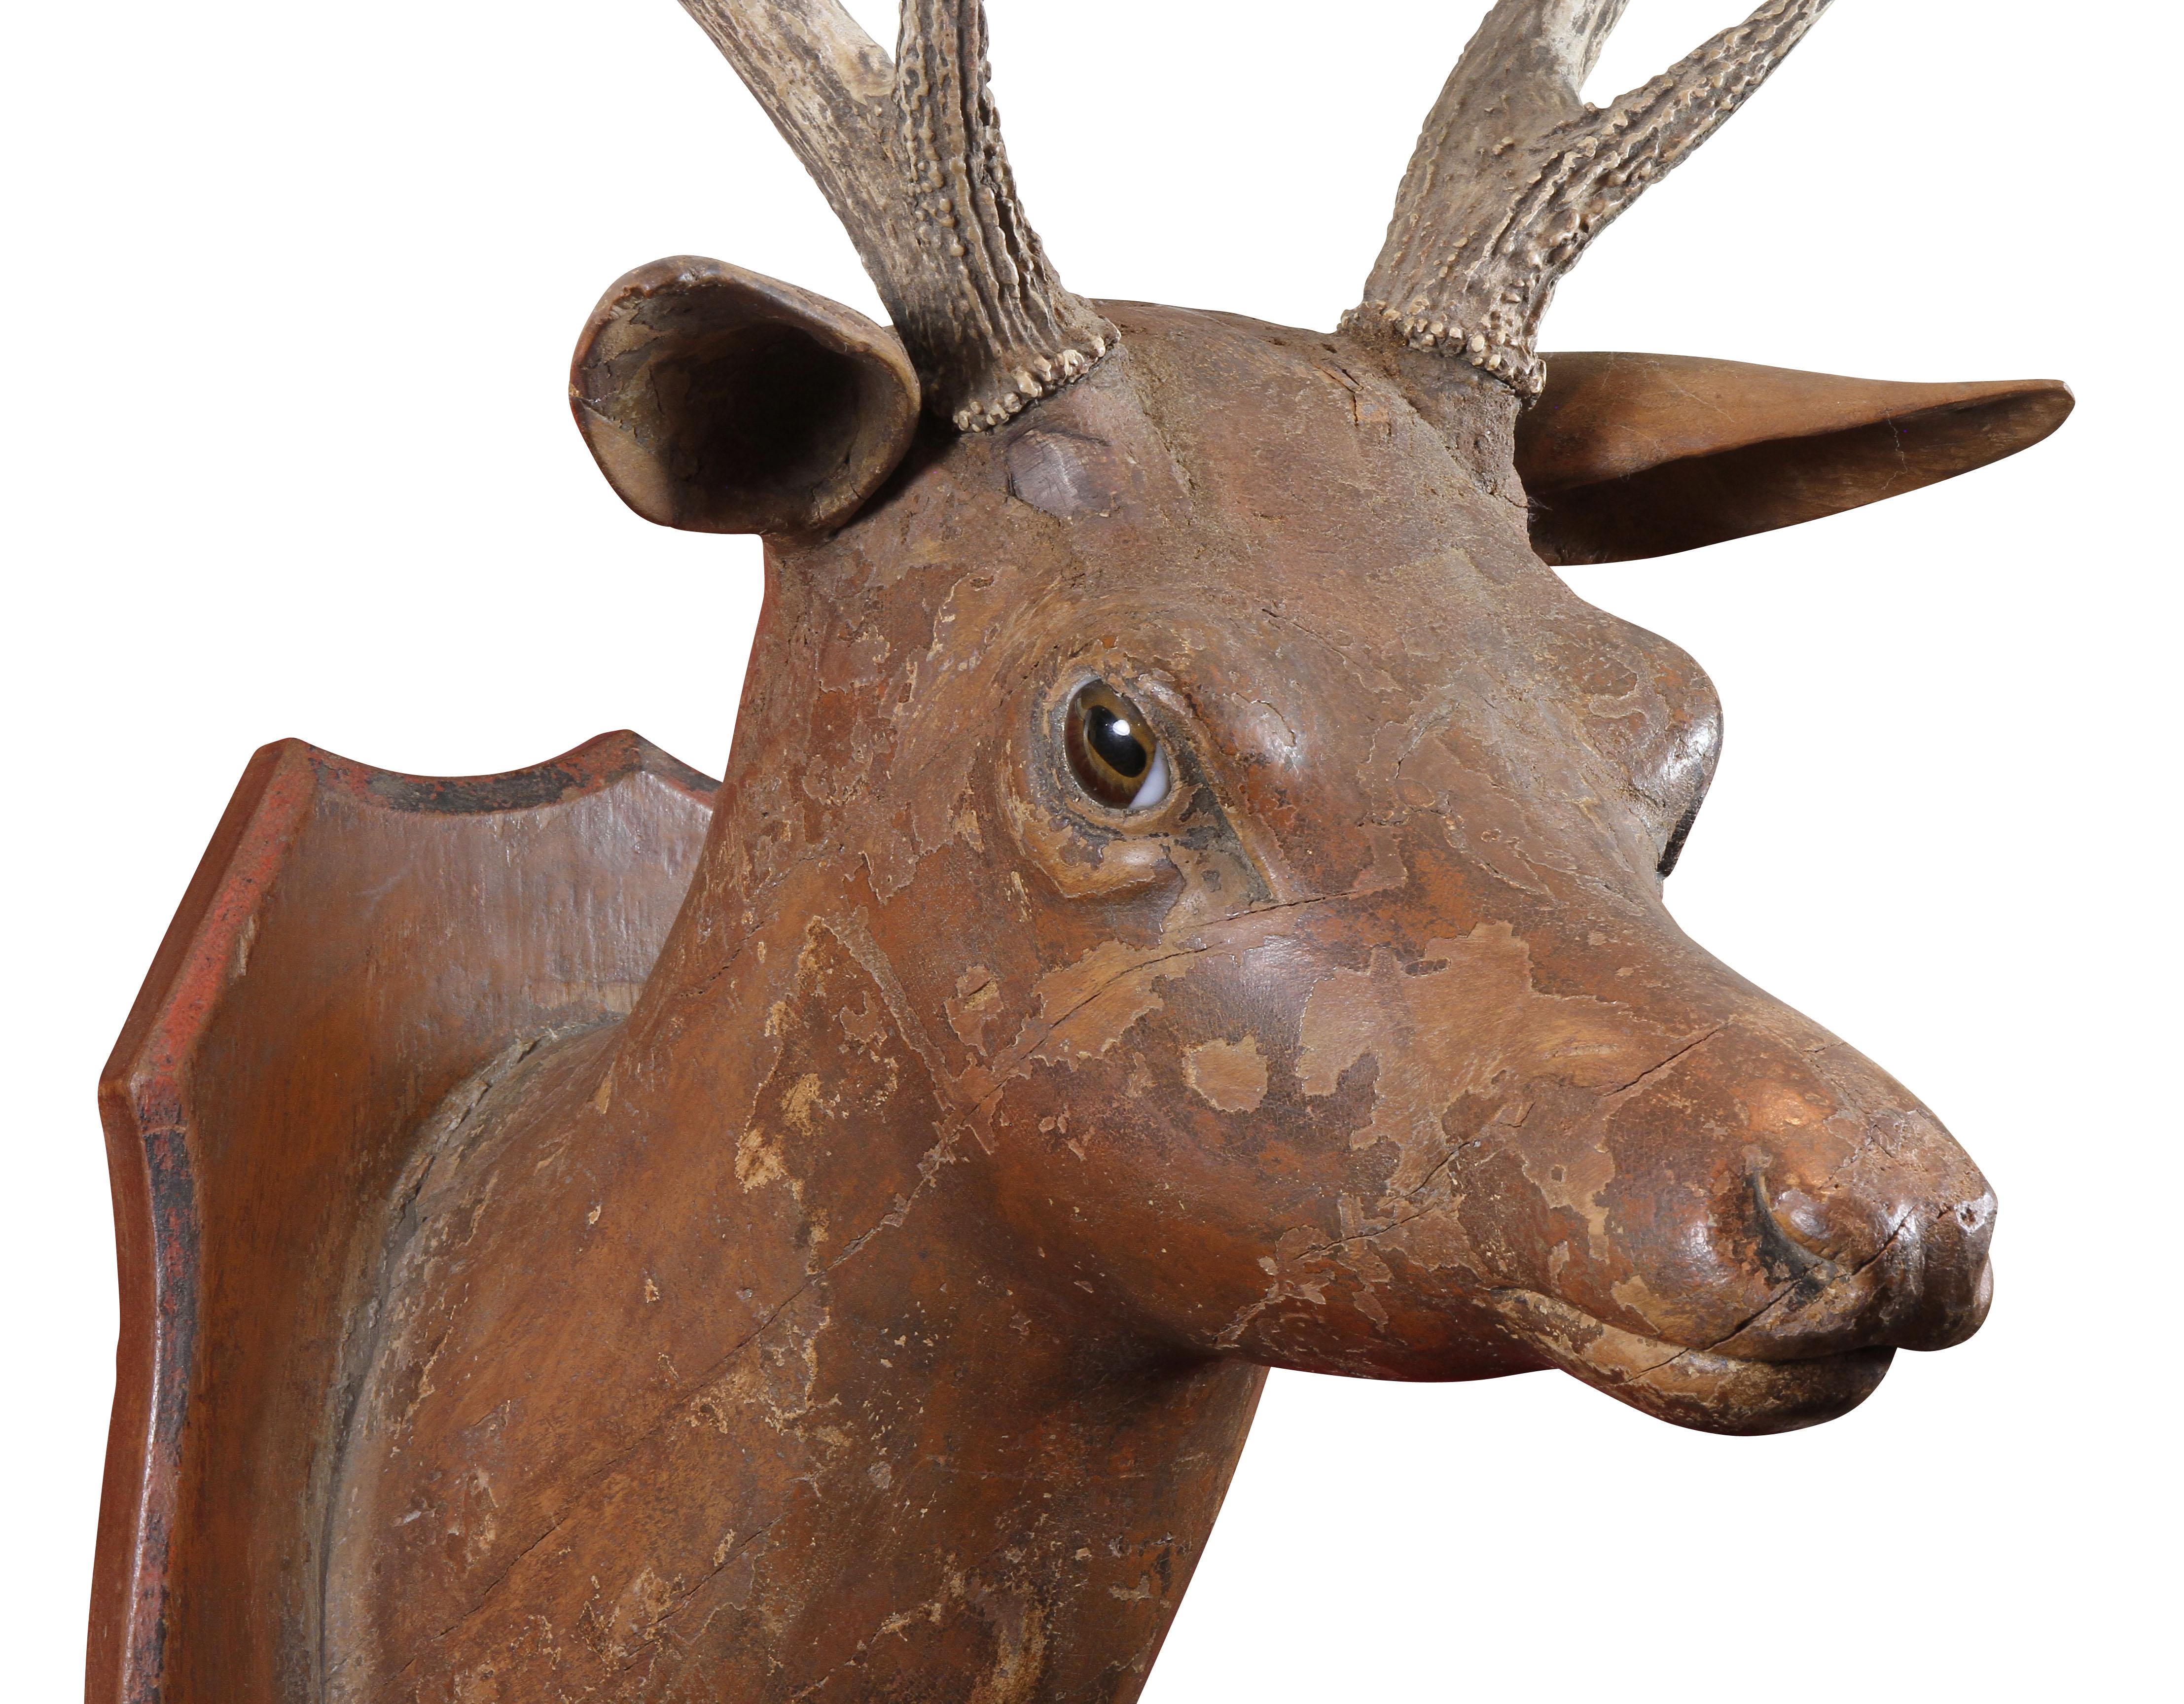 With a pair of mounted antlers, the deer with glass eyes and carved ears. Painted in distressed brown paint. Shield shape wood back.